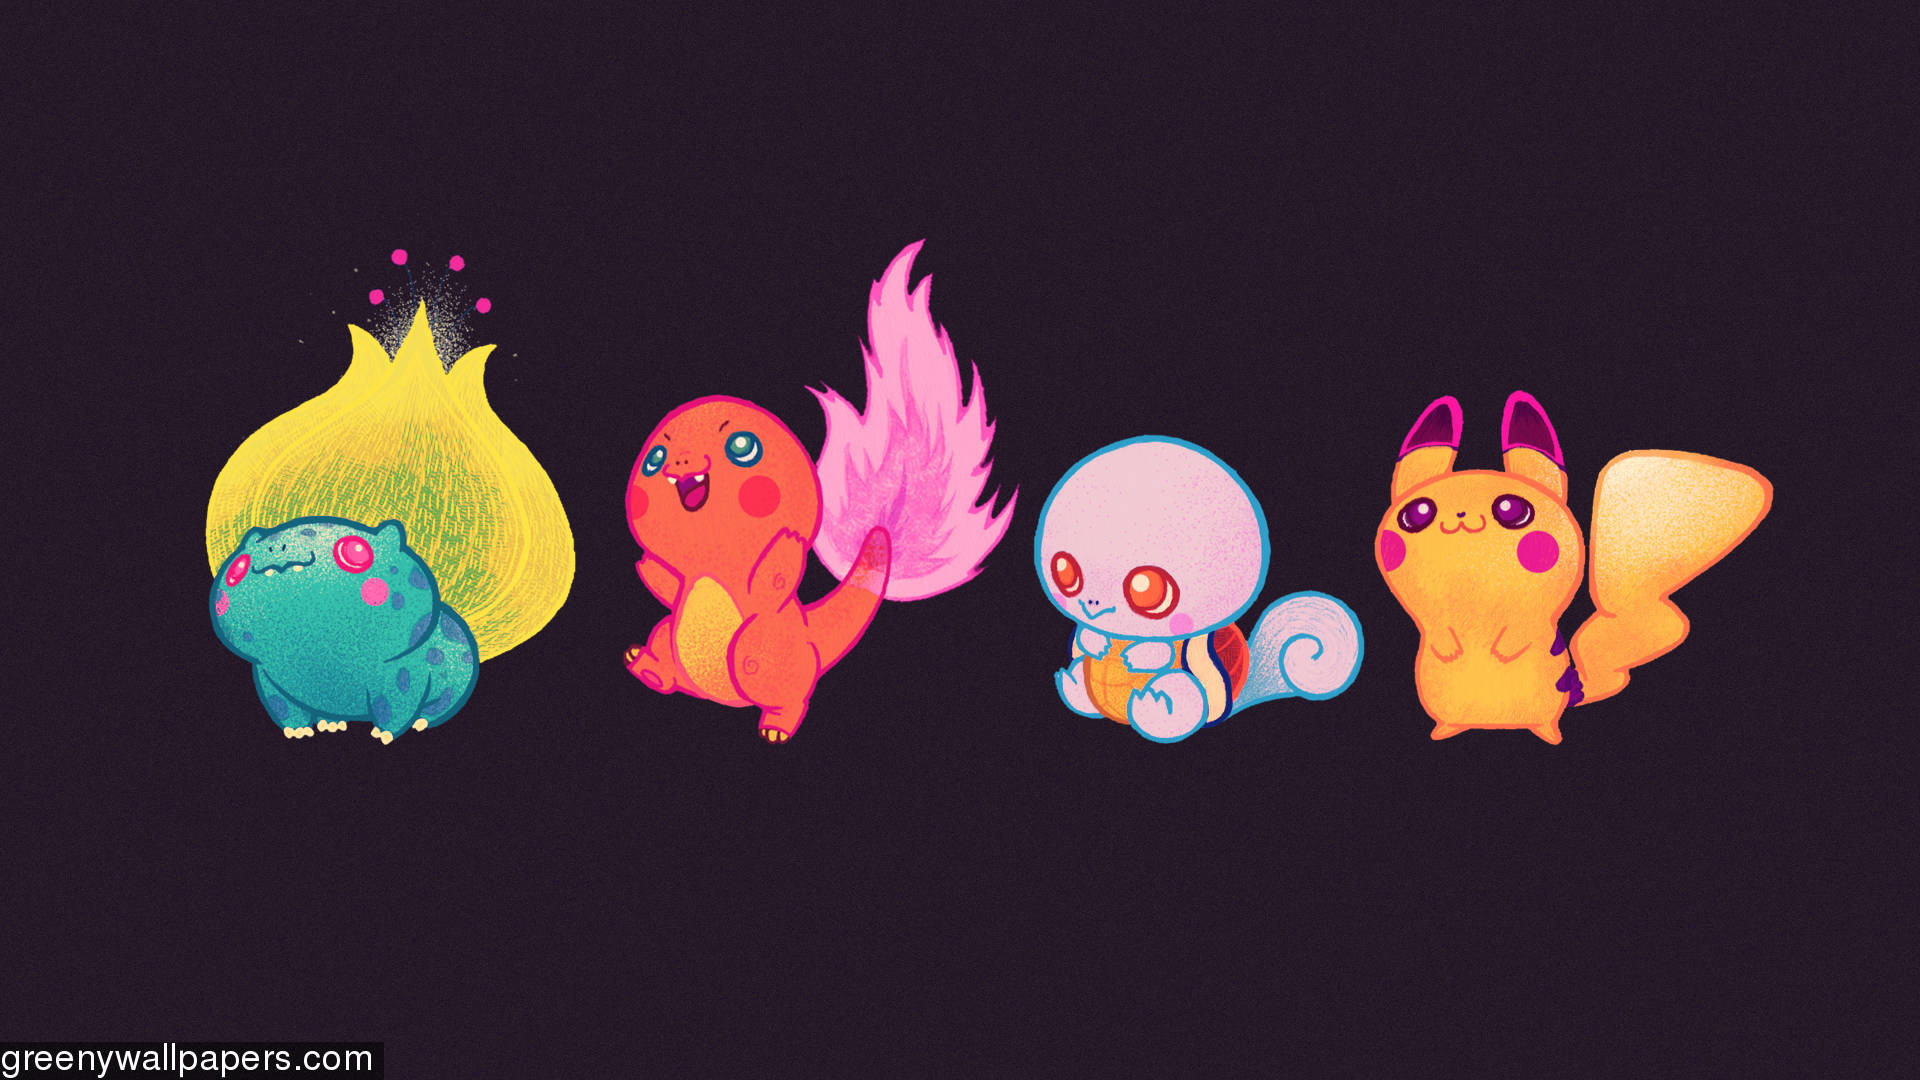 Download free light up wallpapers for your mobile phone most 19201080 Light Up Wallpapers Pokemon FusionPokemon